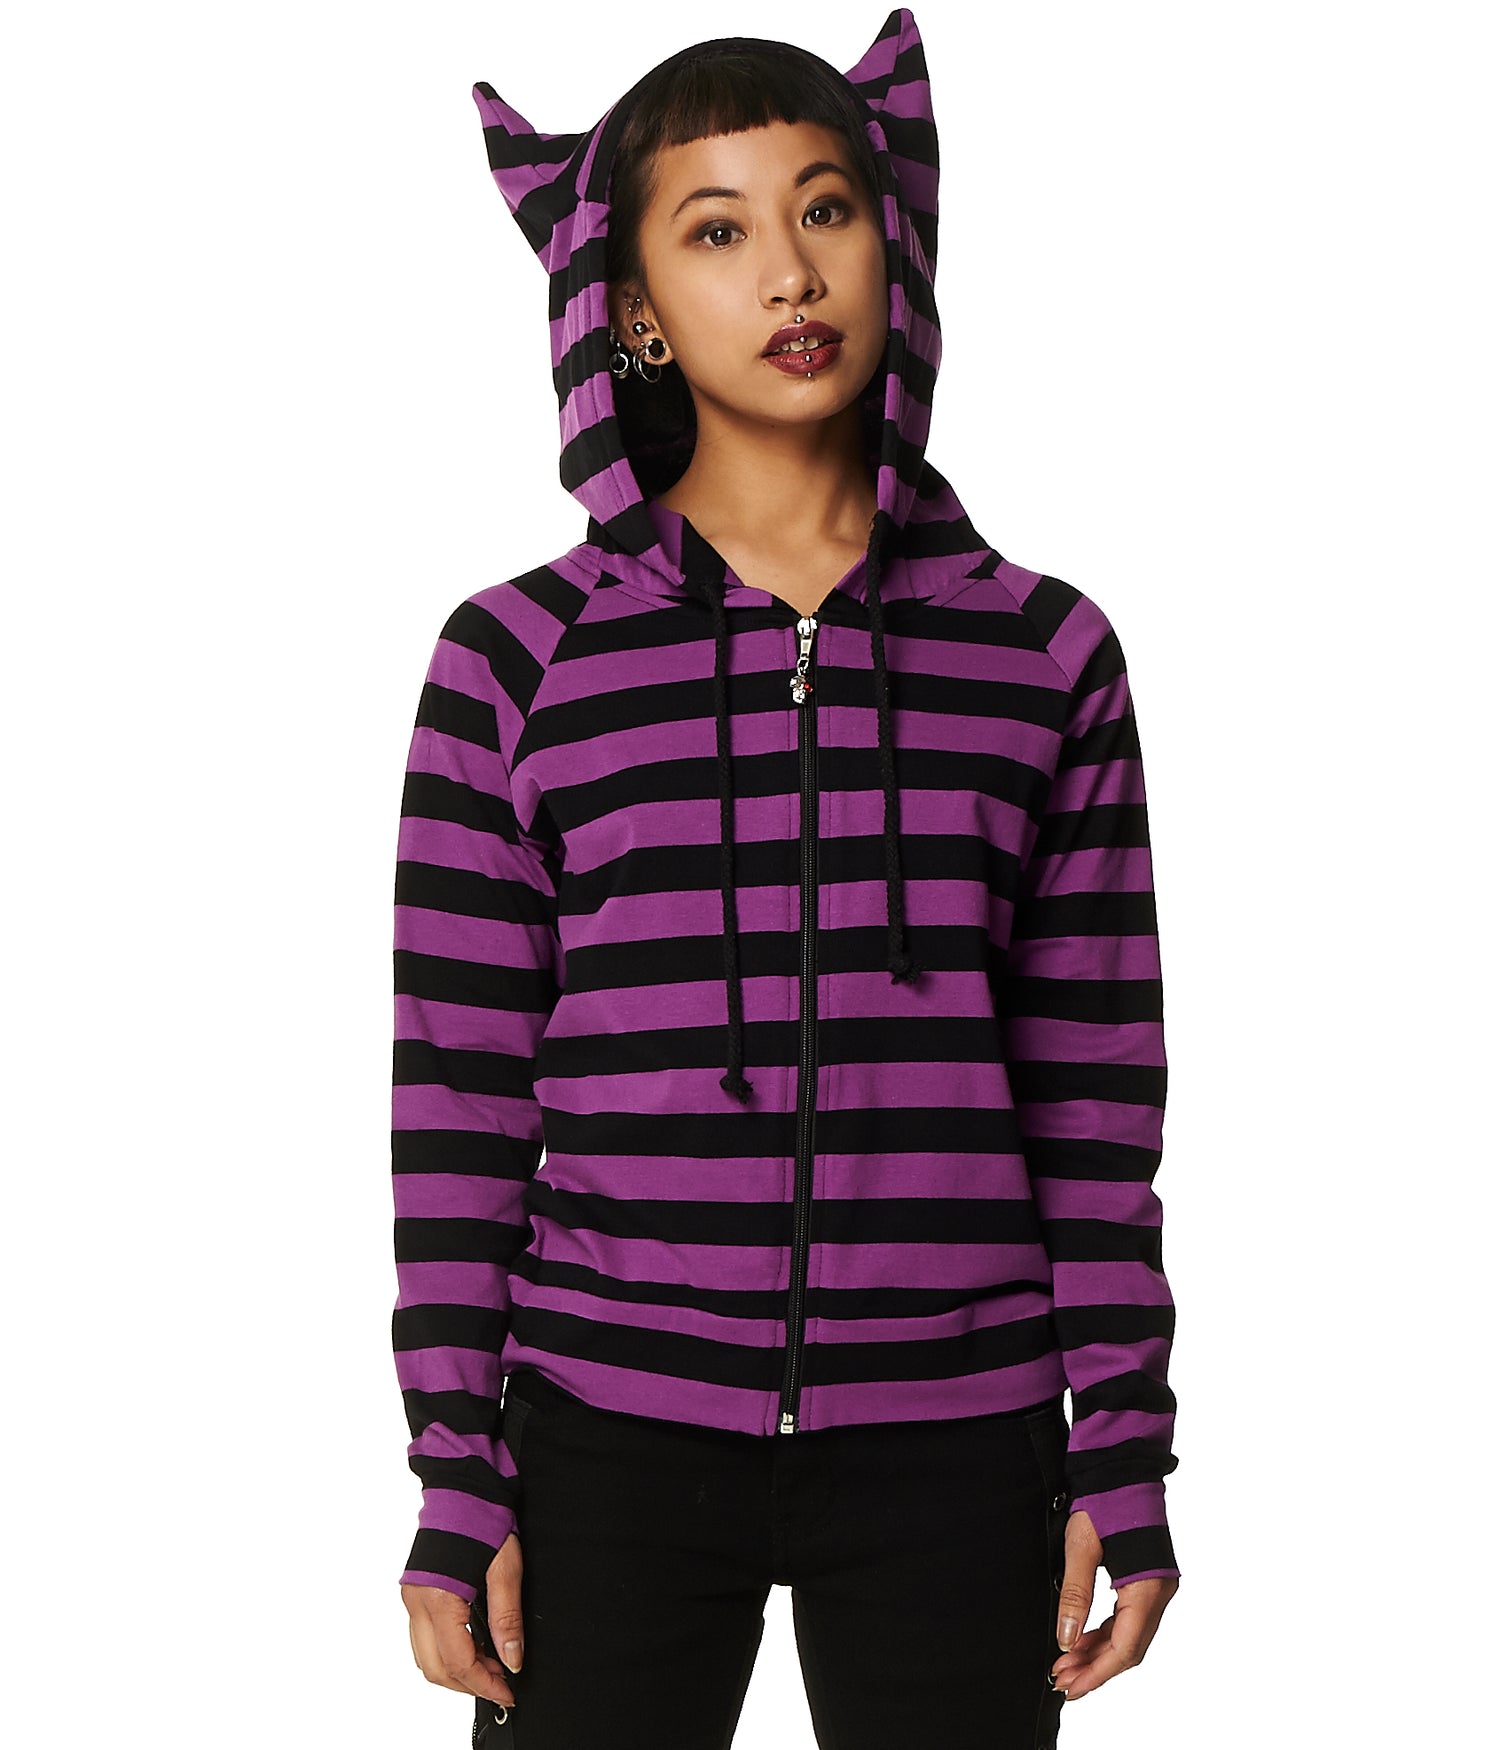 Model wearing a purple stripes zip up hoodie with cat ears on the hood and thumb holes in the sleeves